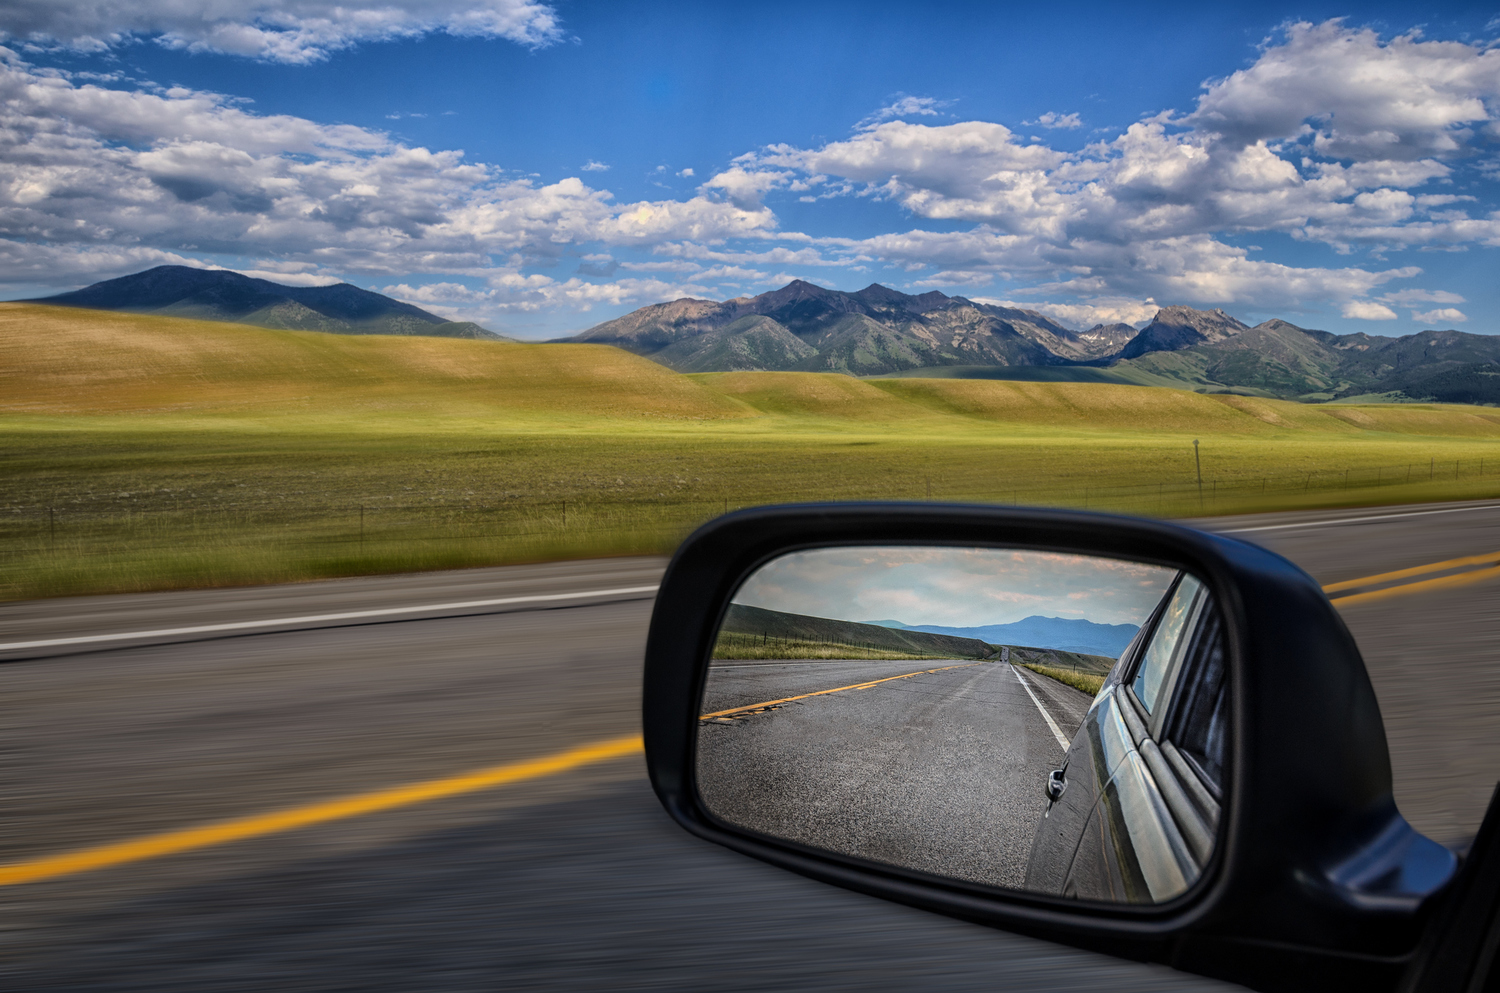 The Rear View Mirror is For Glancing, Not For Guiding! — Balancing Act, LLC